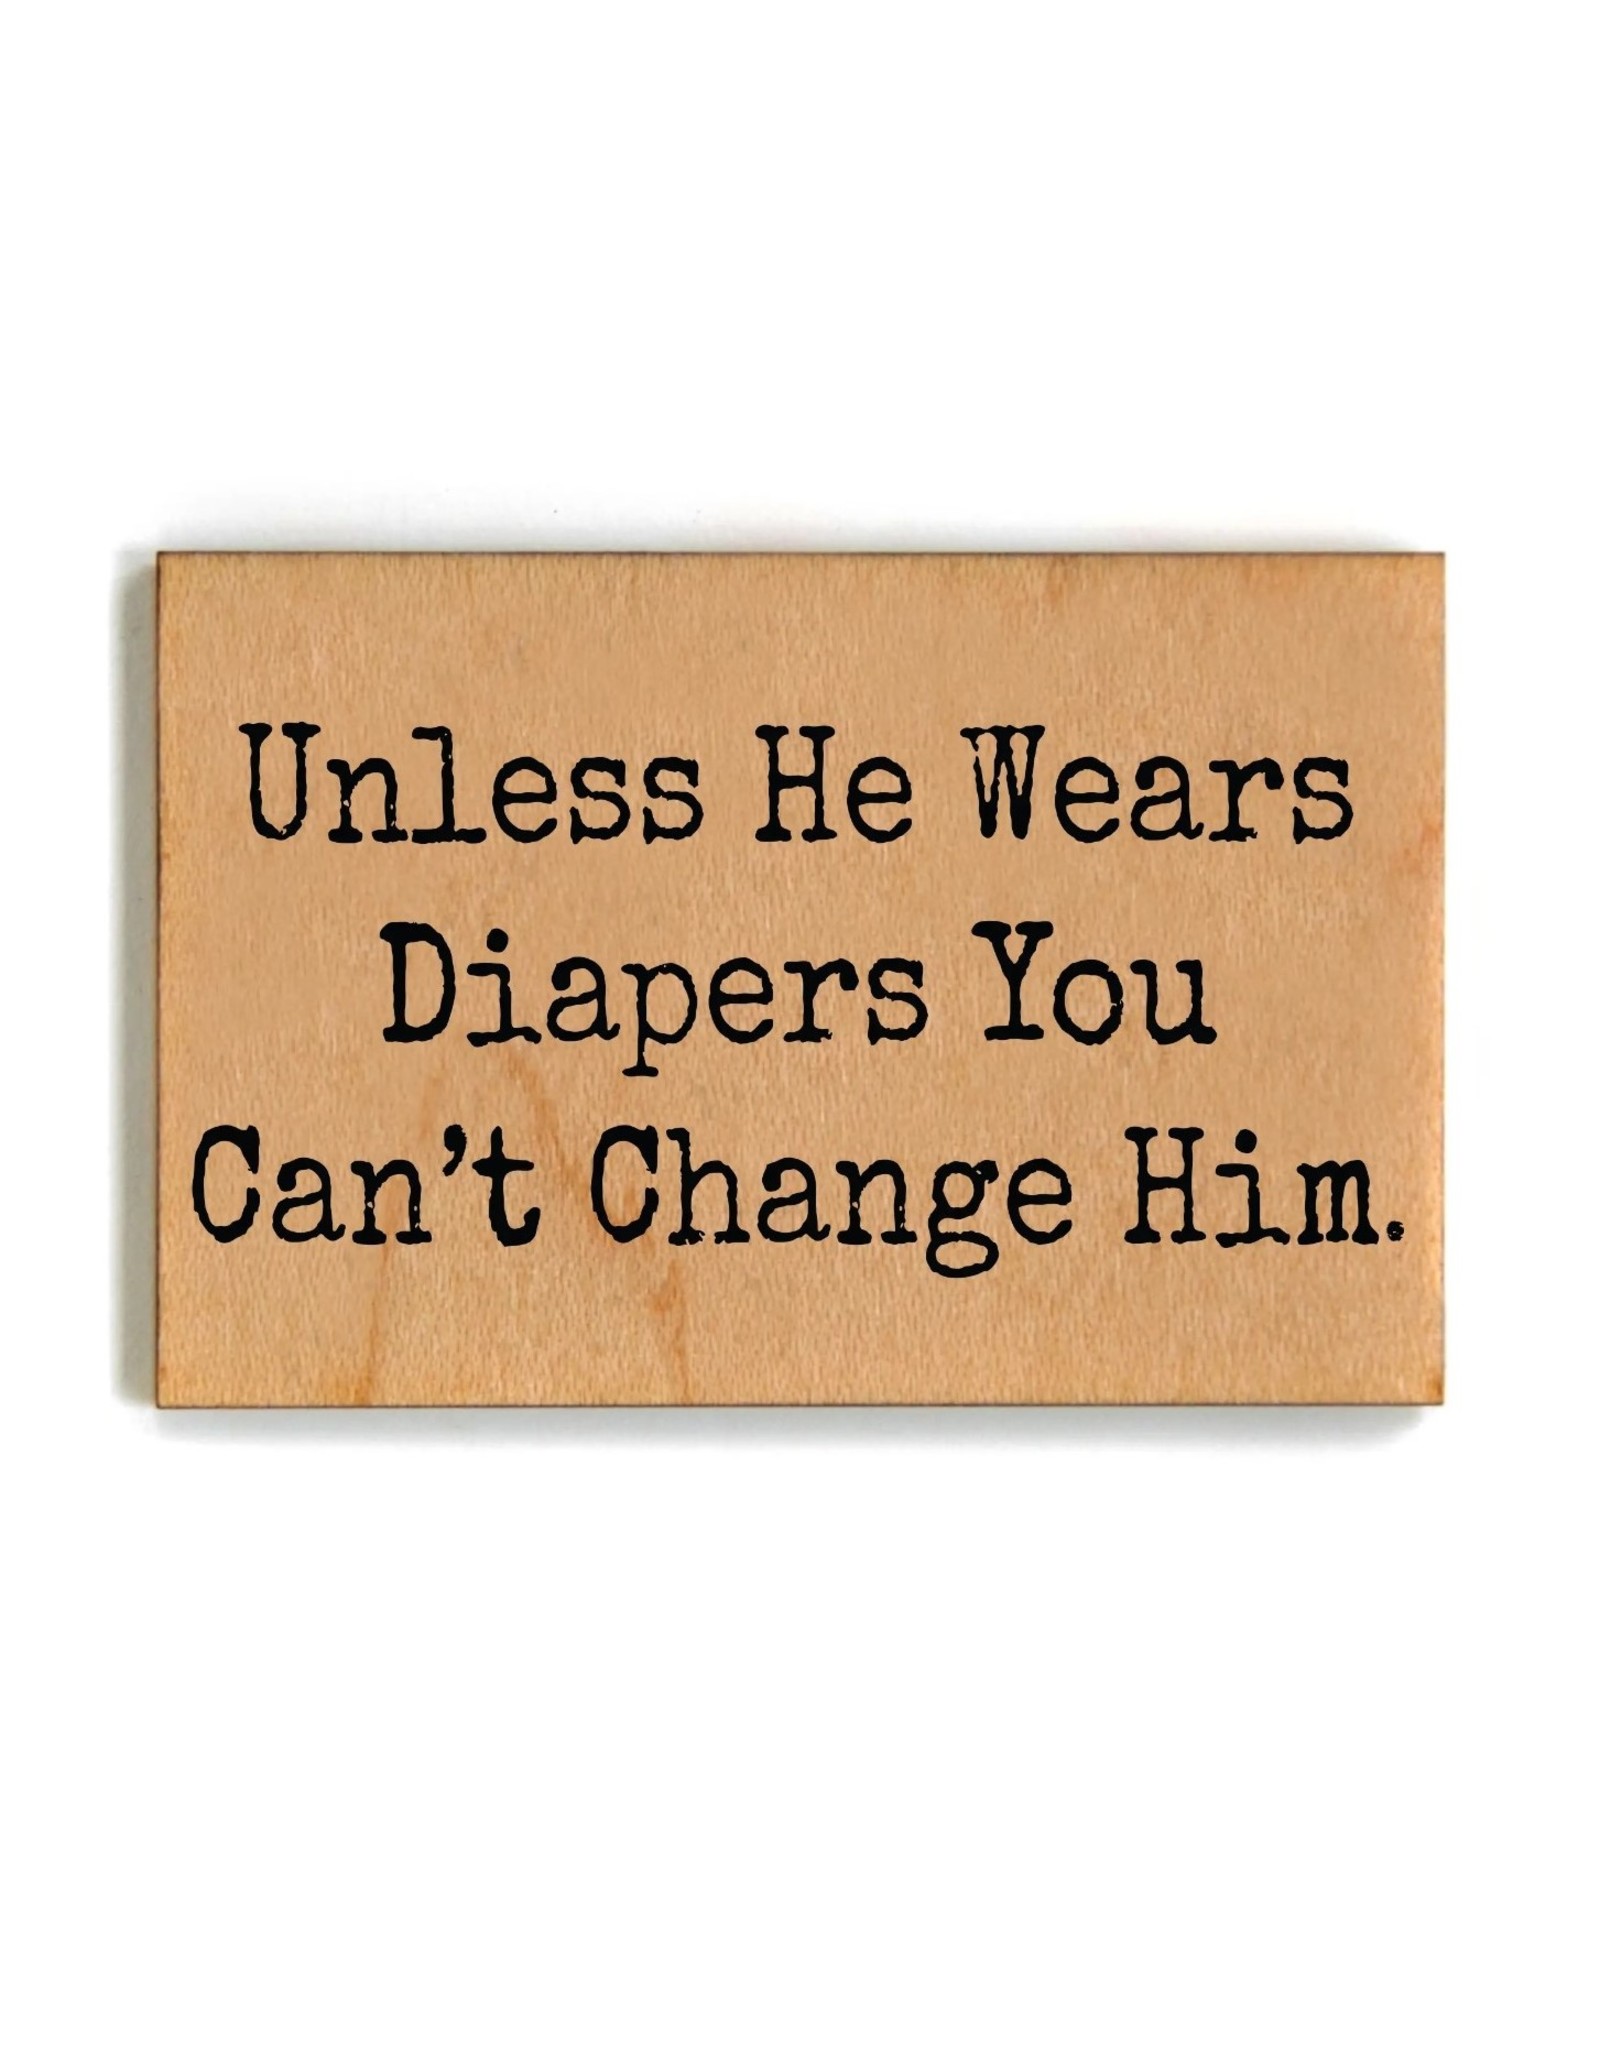 You Can't Change Him - Funny Wood Magnets